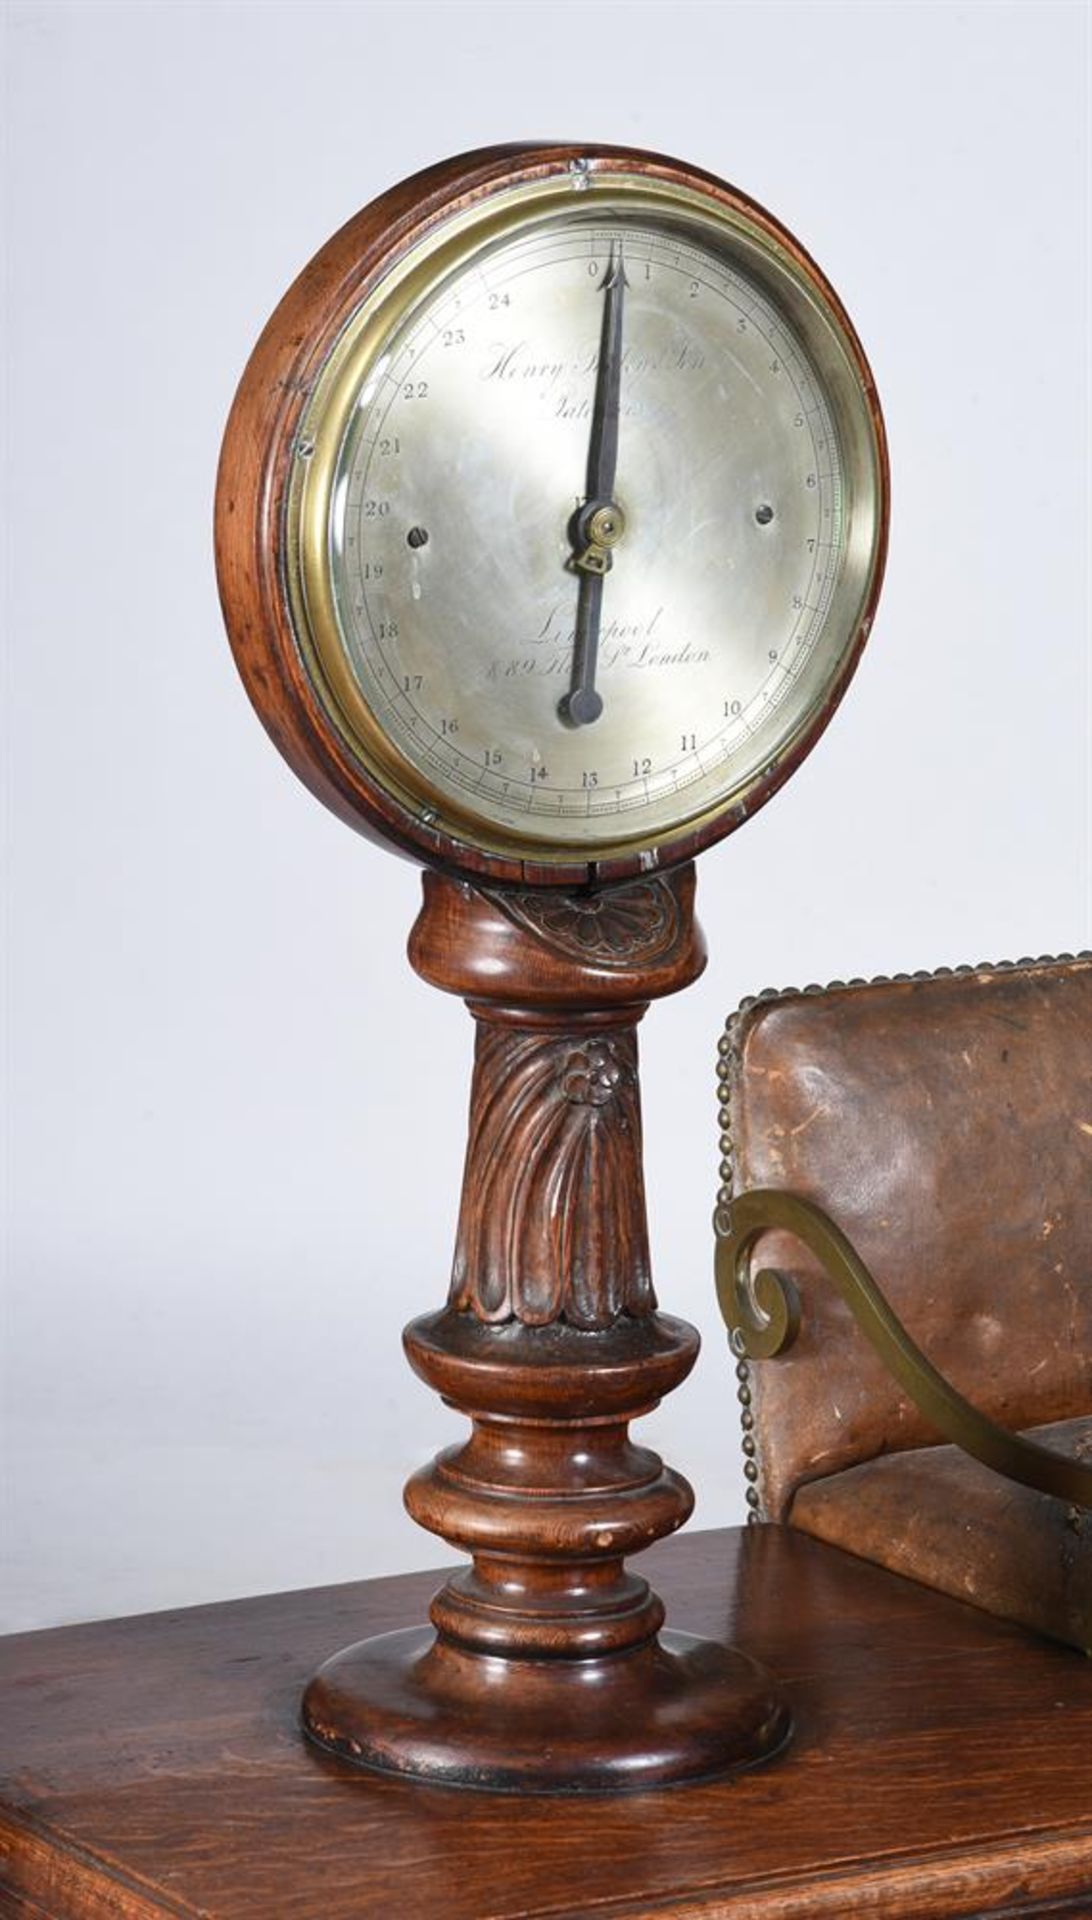 A SET OF LATE VICTORIAN OAK AND BRASS JOCKEY SCALES, BY HENRY POOLEY & SONS, LATE 19TH CENTURY - Image 2 of 4